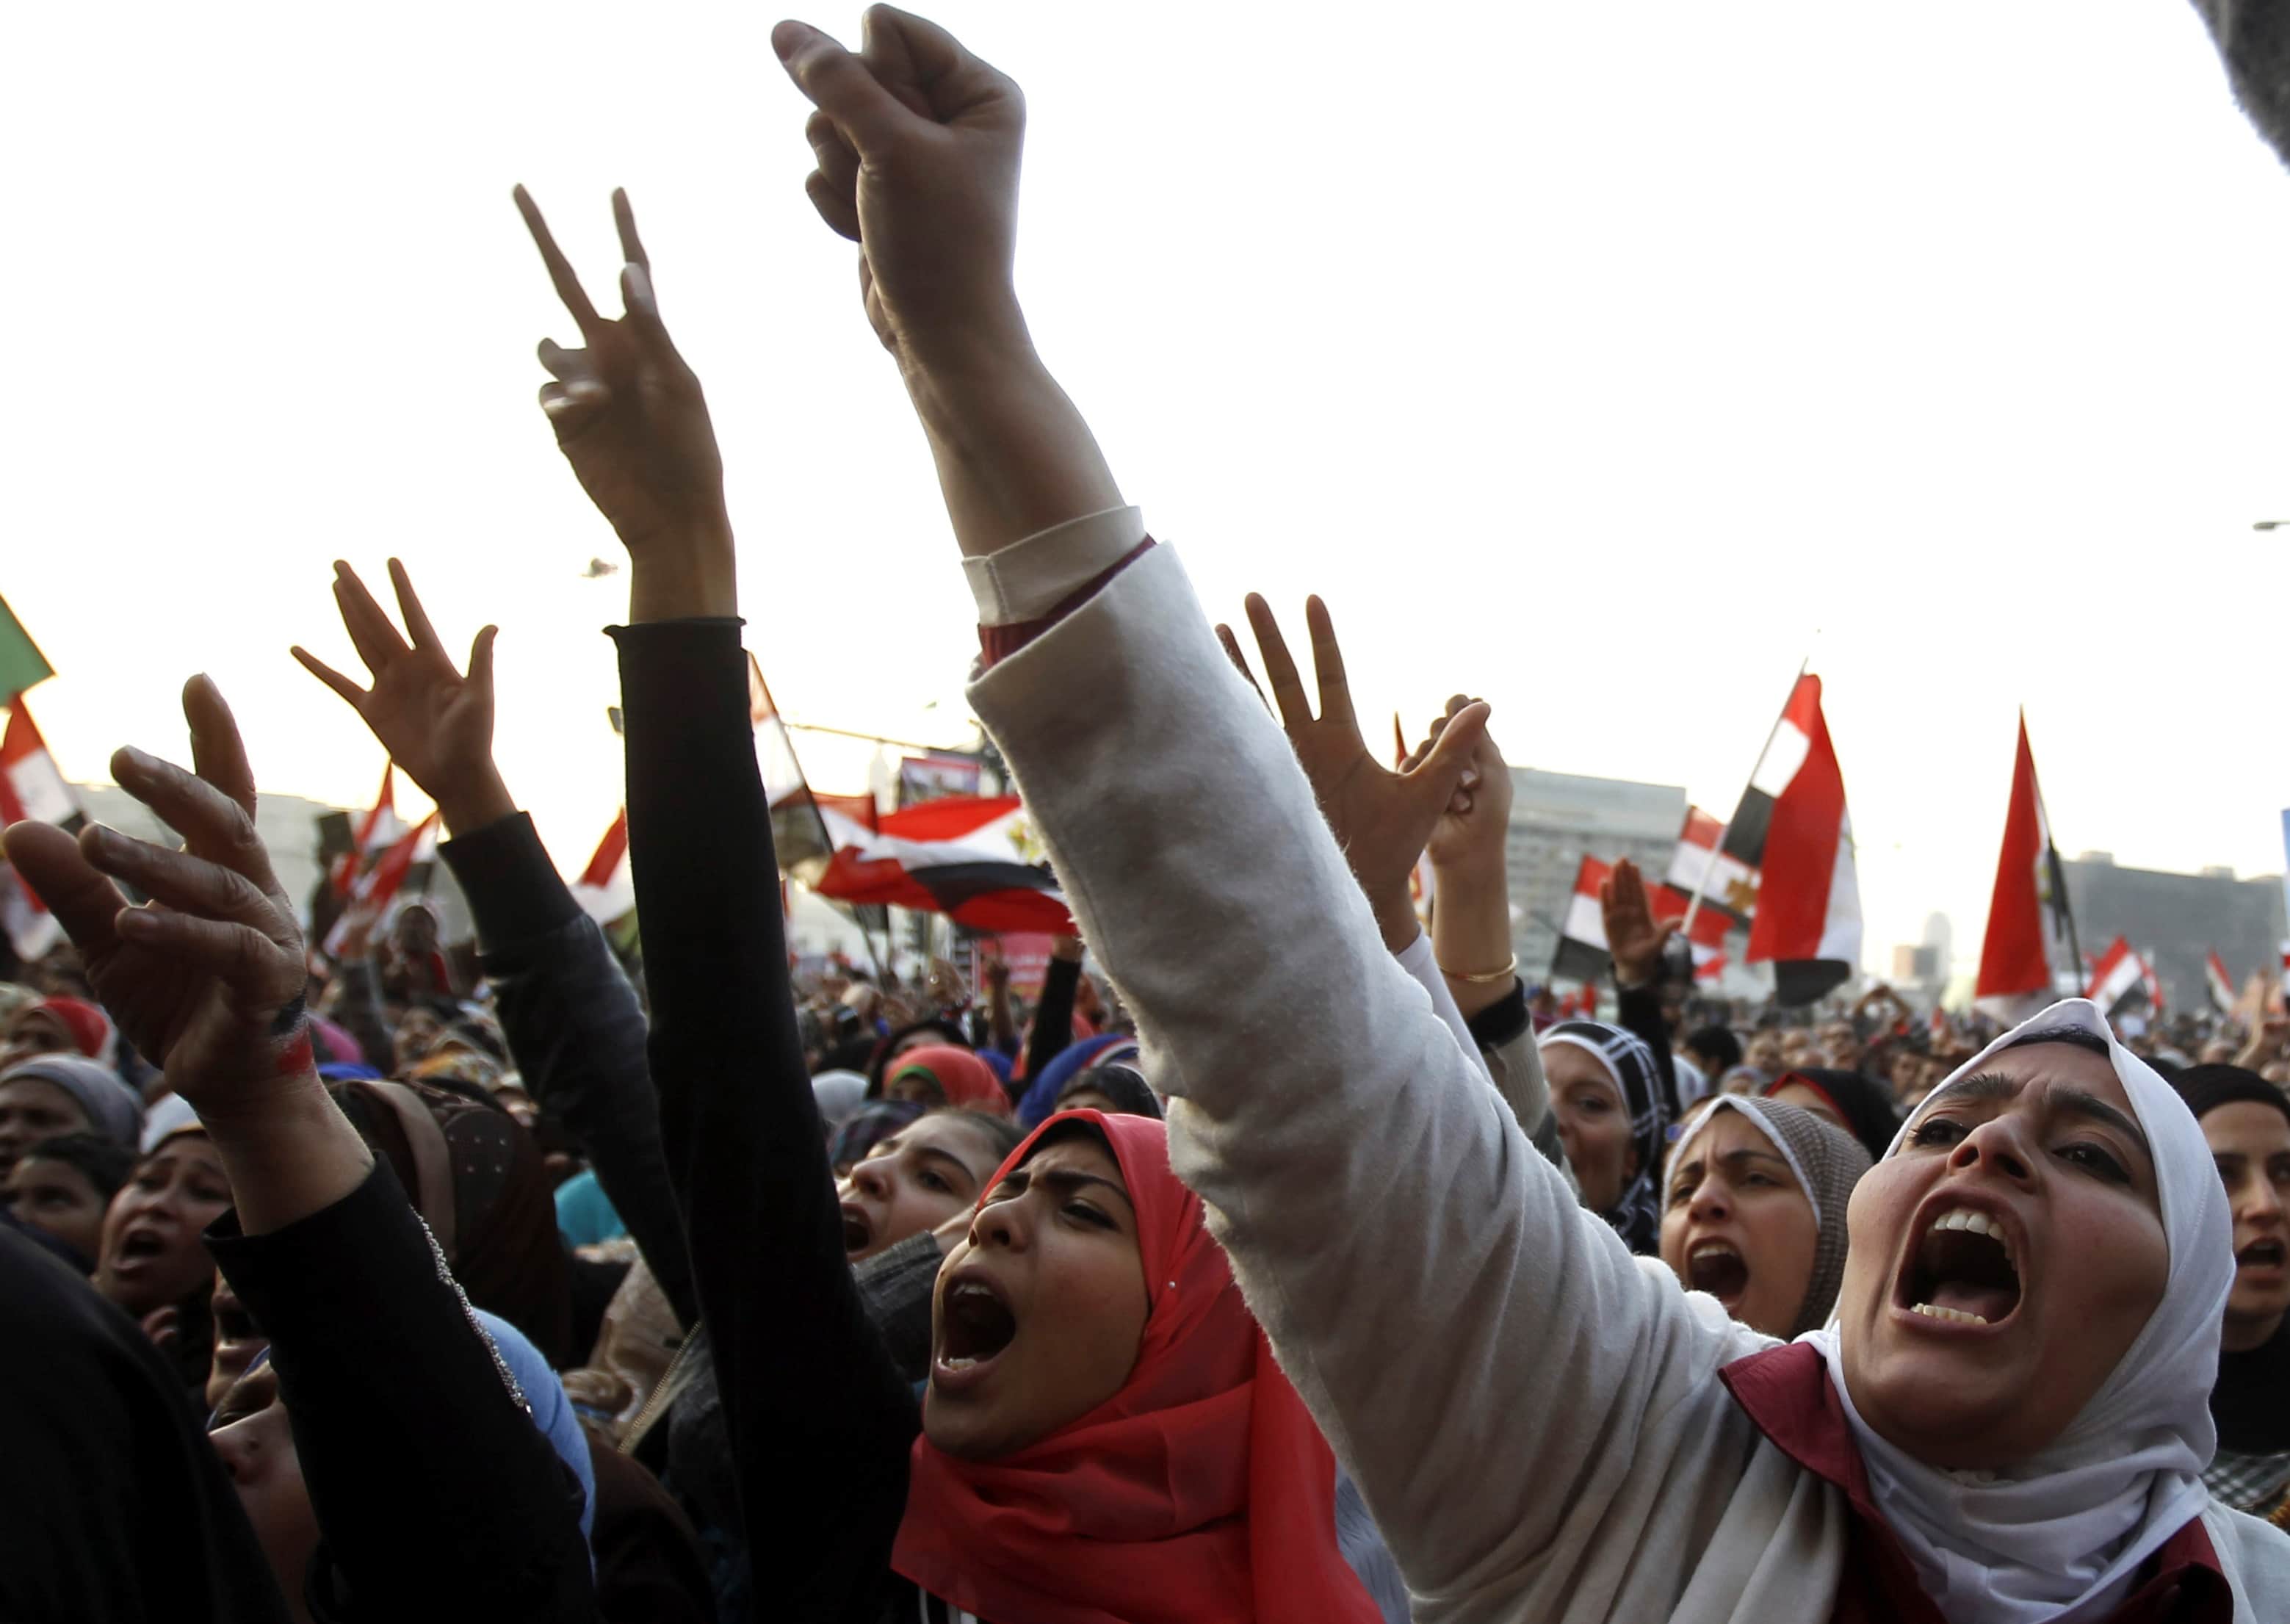 Women shout during a protest in Tahrir Square in Cairo on 25 January 2013, REUTERS/Mohamed Abd El Ghany